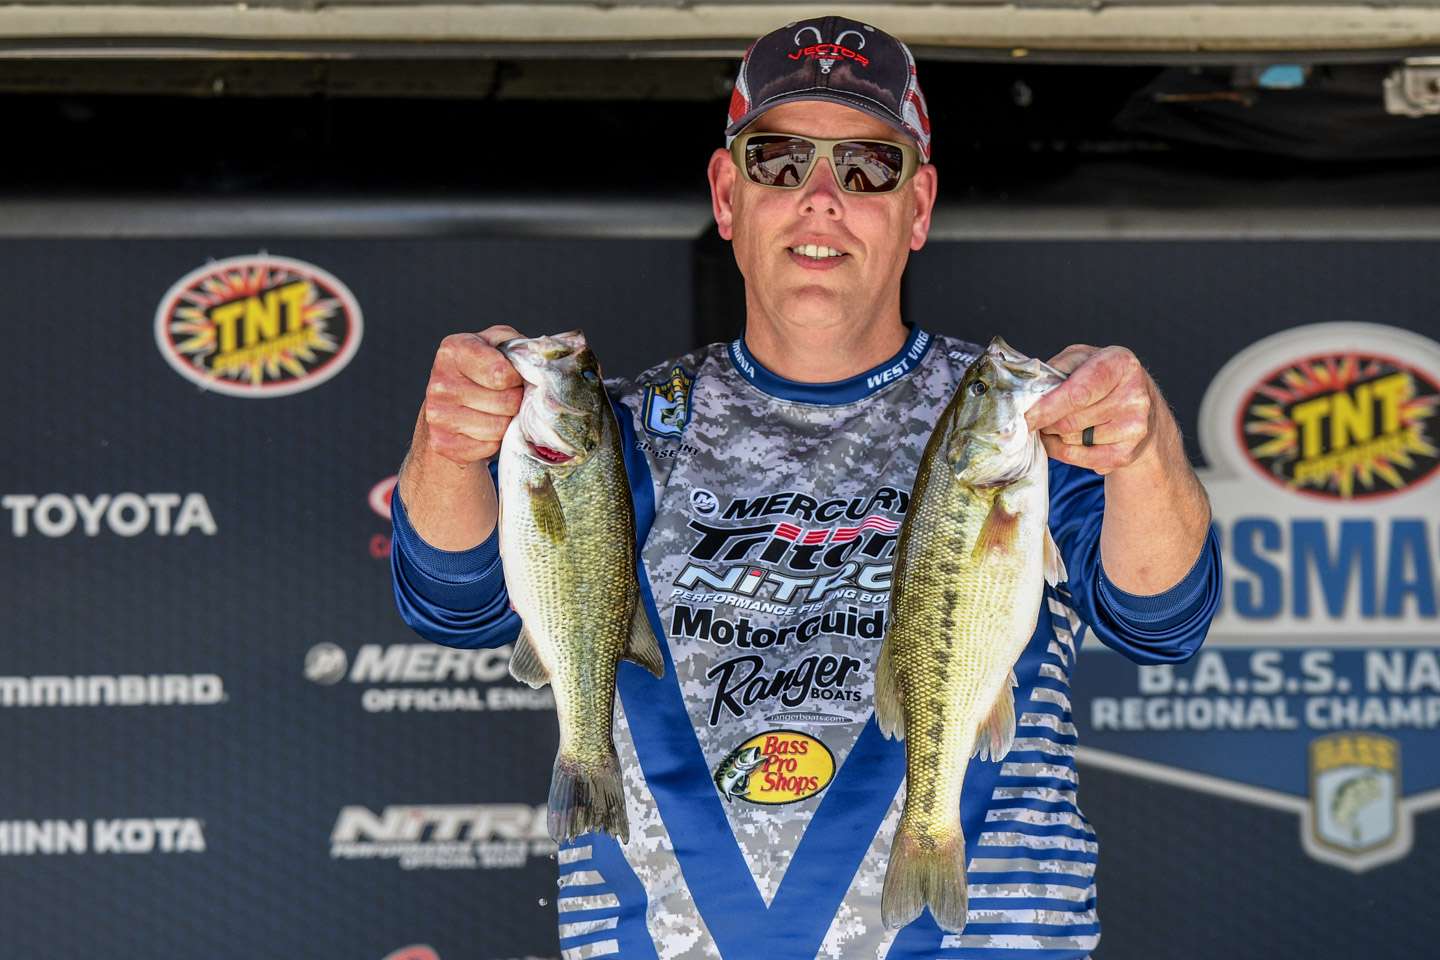 Chase Bryant,	co-angler, West Virginia (29th, 9 - 0)